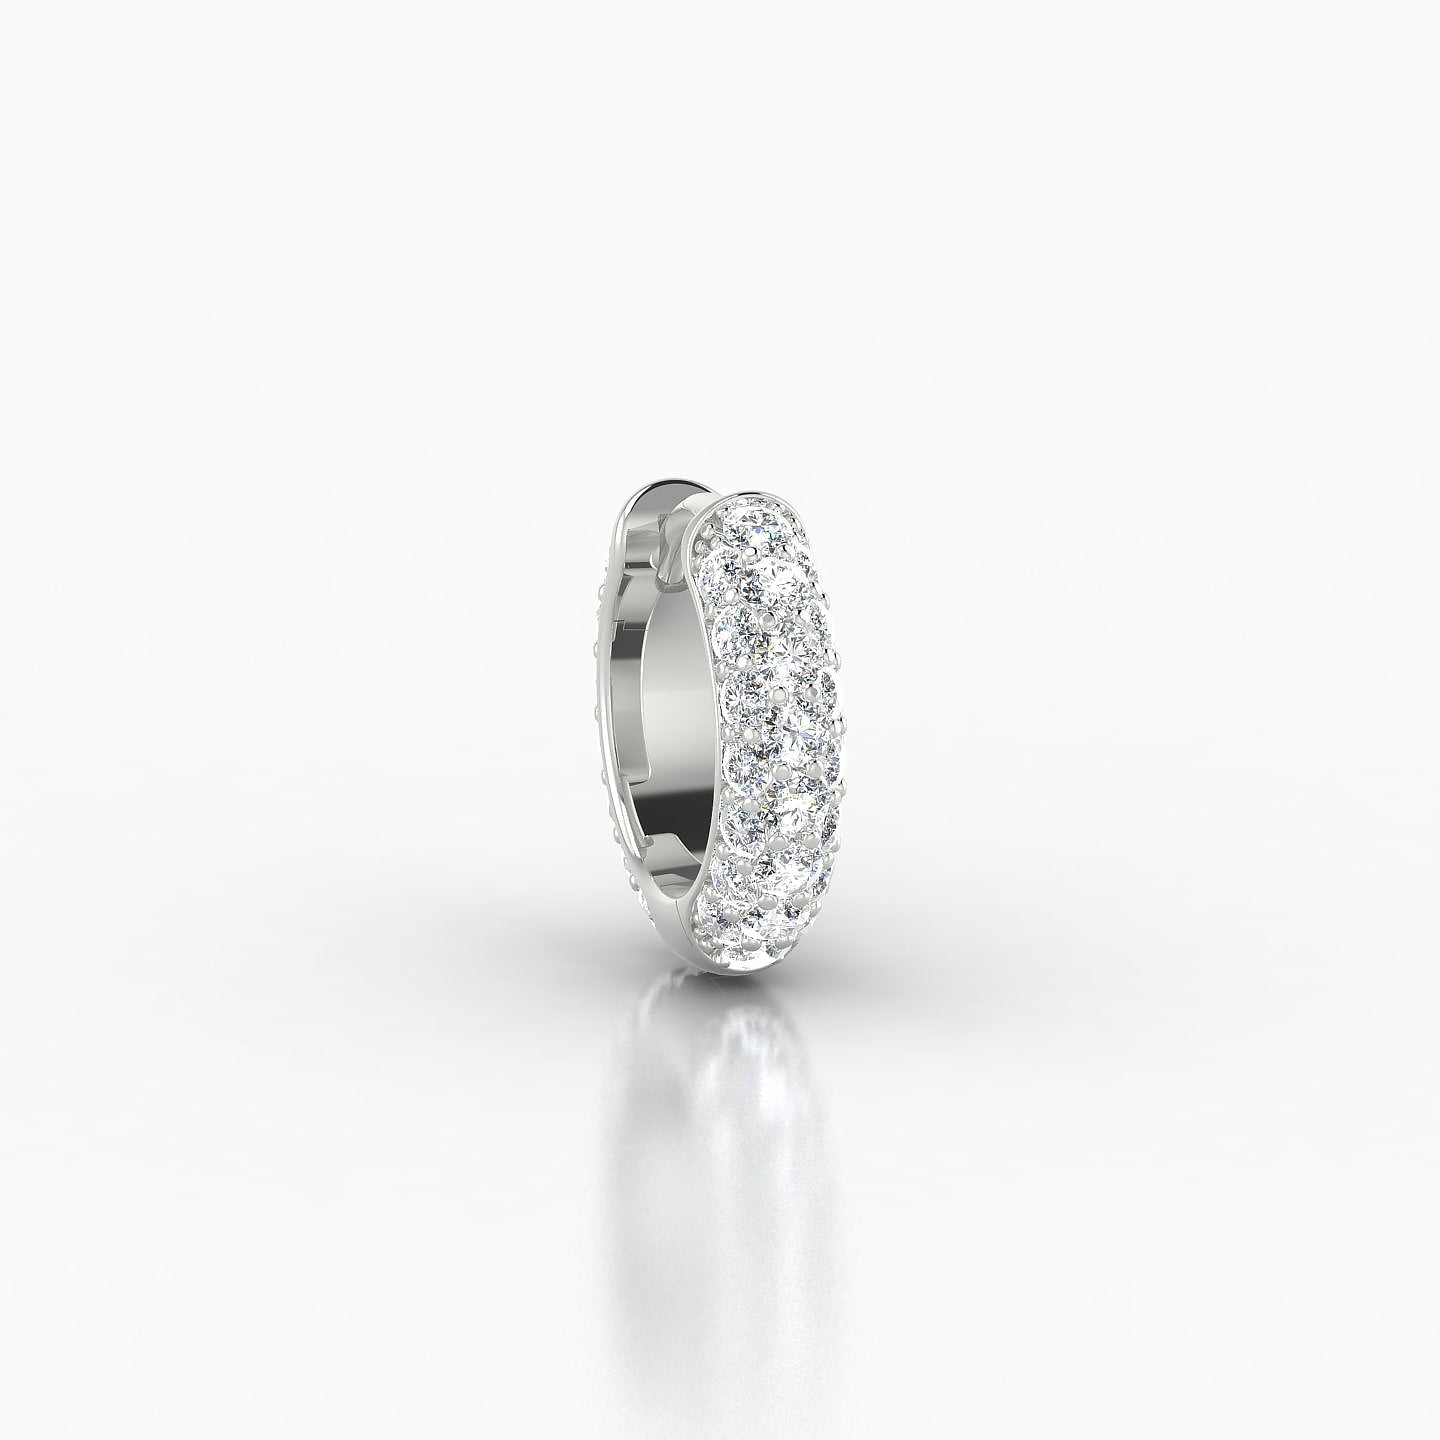 Theia | 18k White Gold 6.5 mm Pave Diamond Nose Ring Piercing